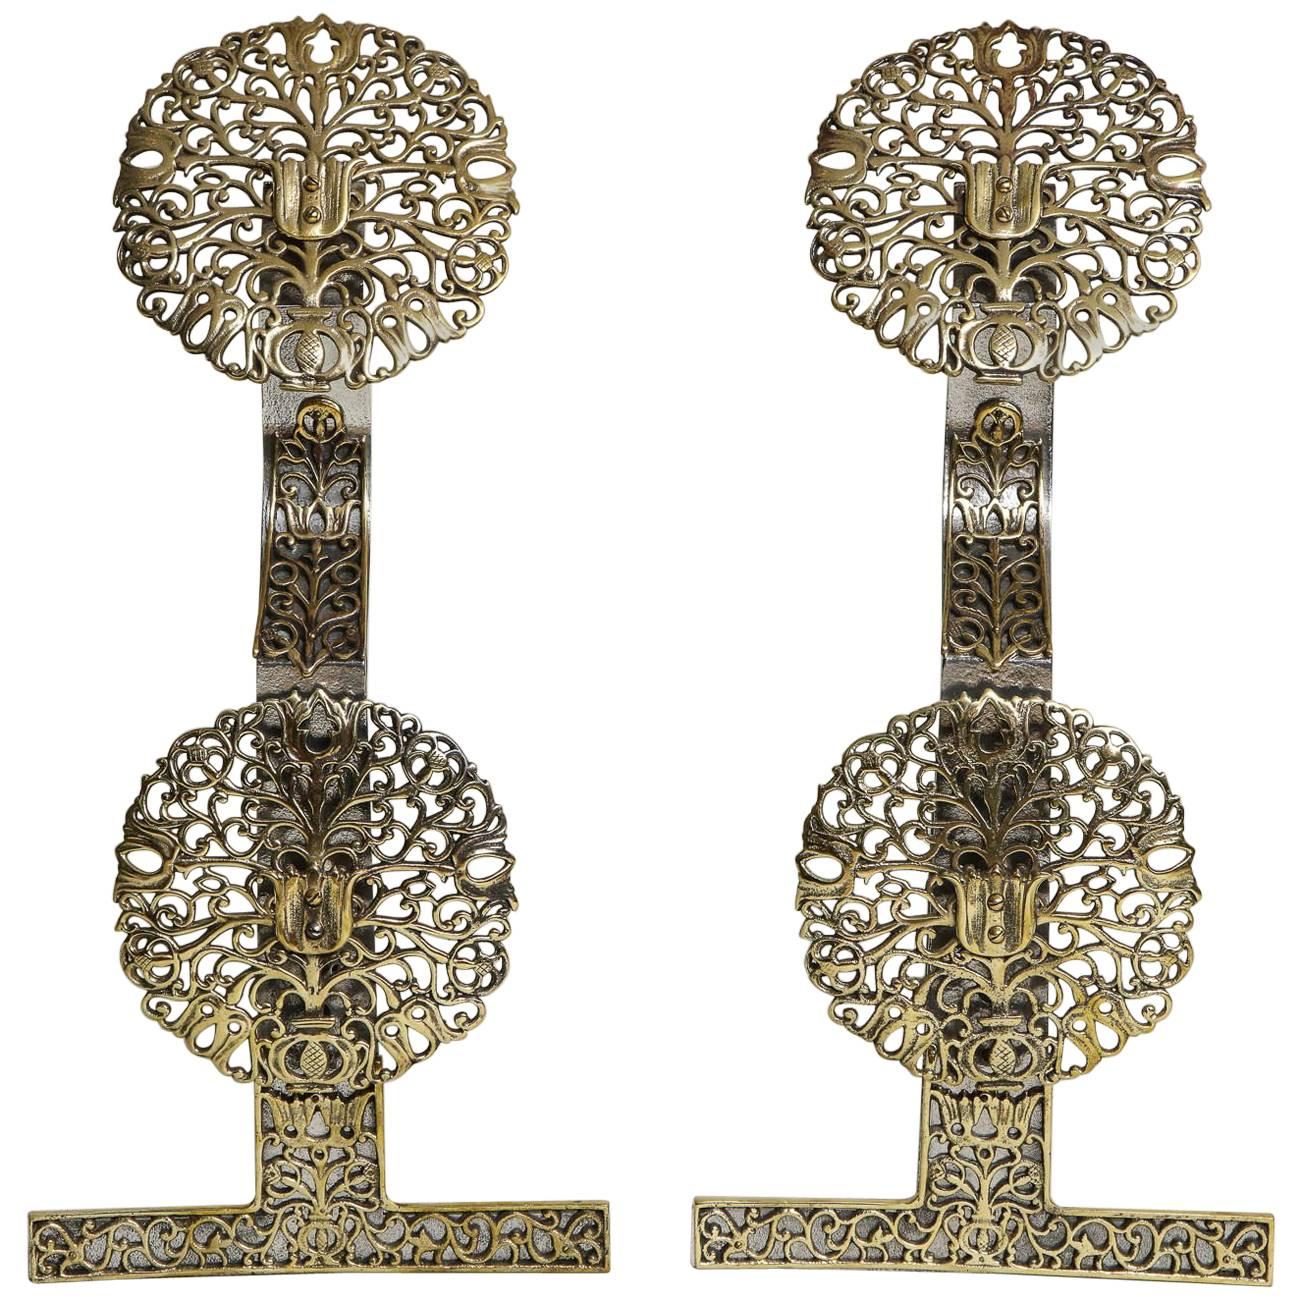 Tree-of-Life Andirons For Sale